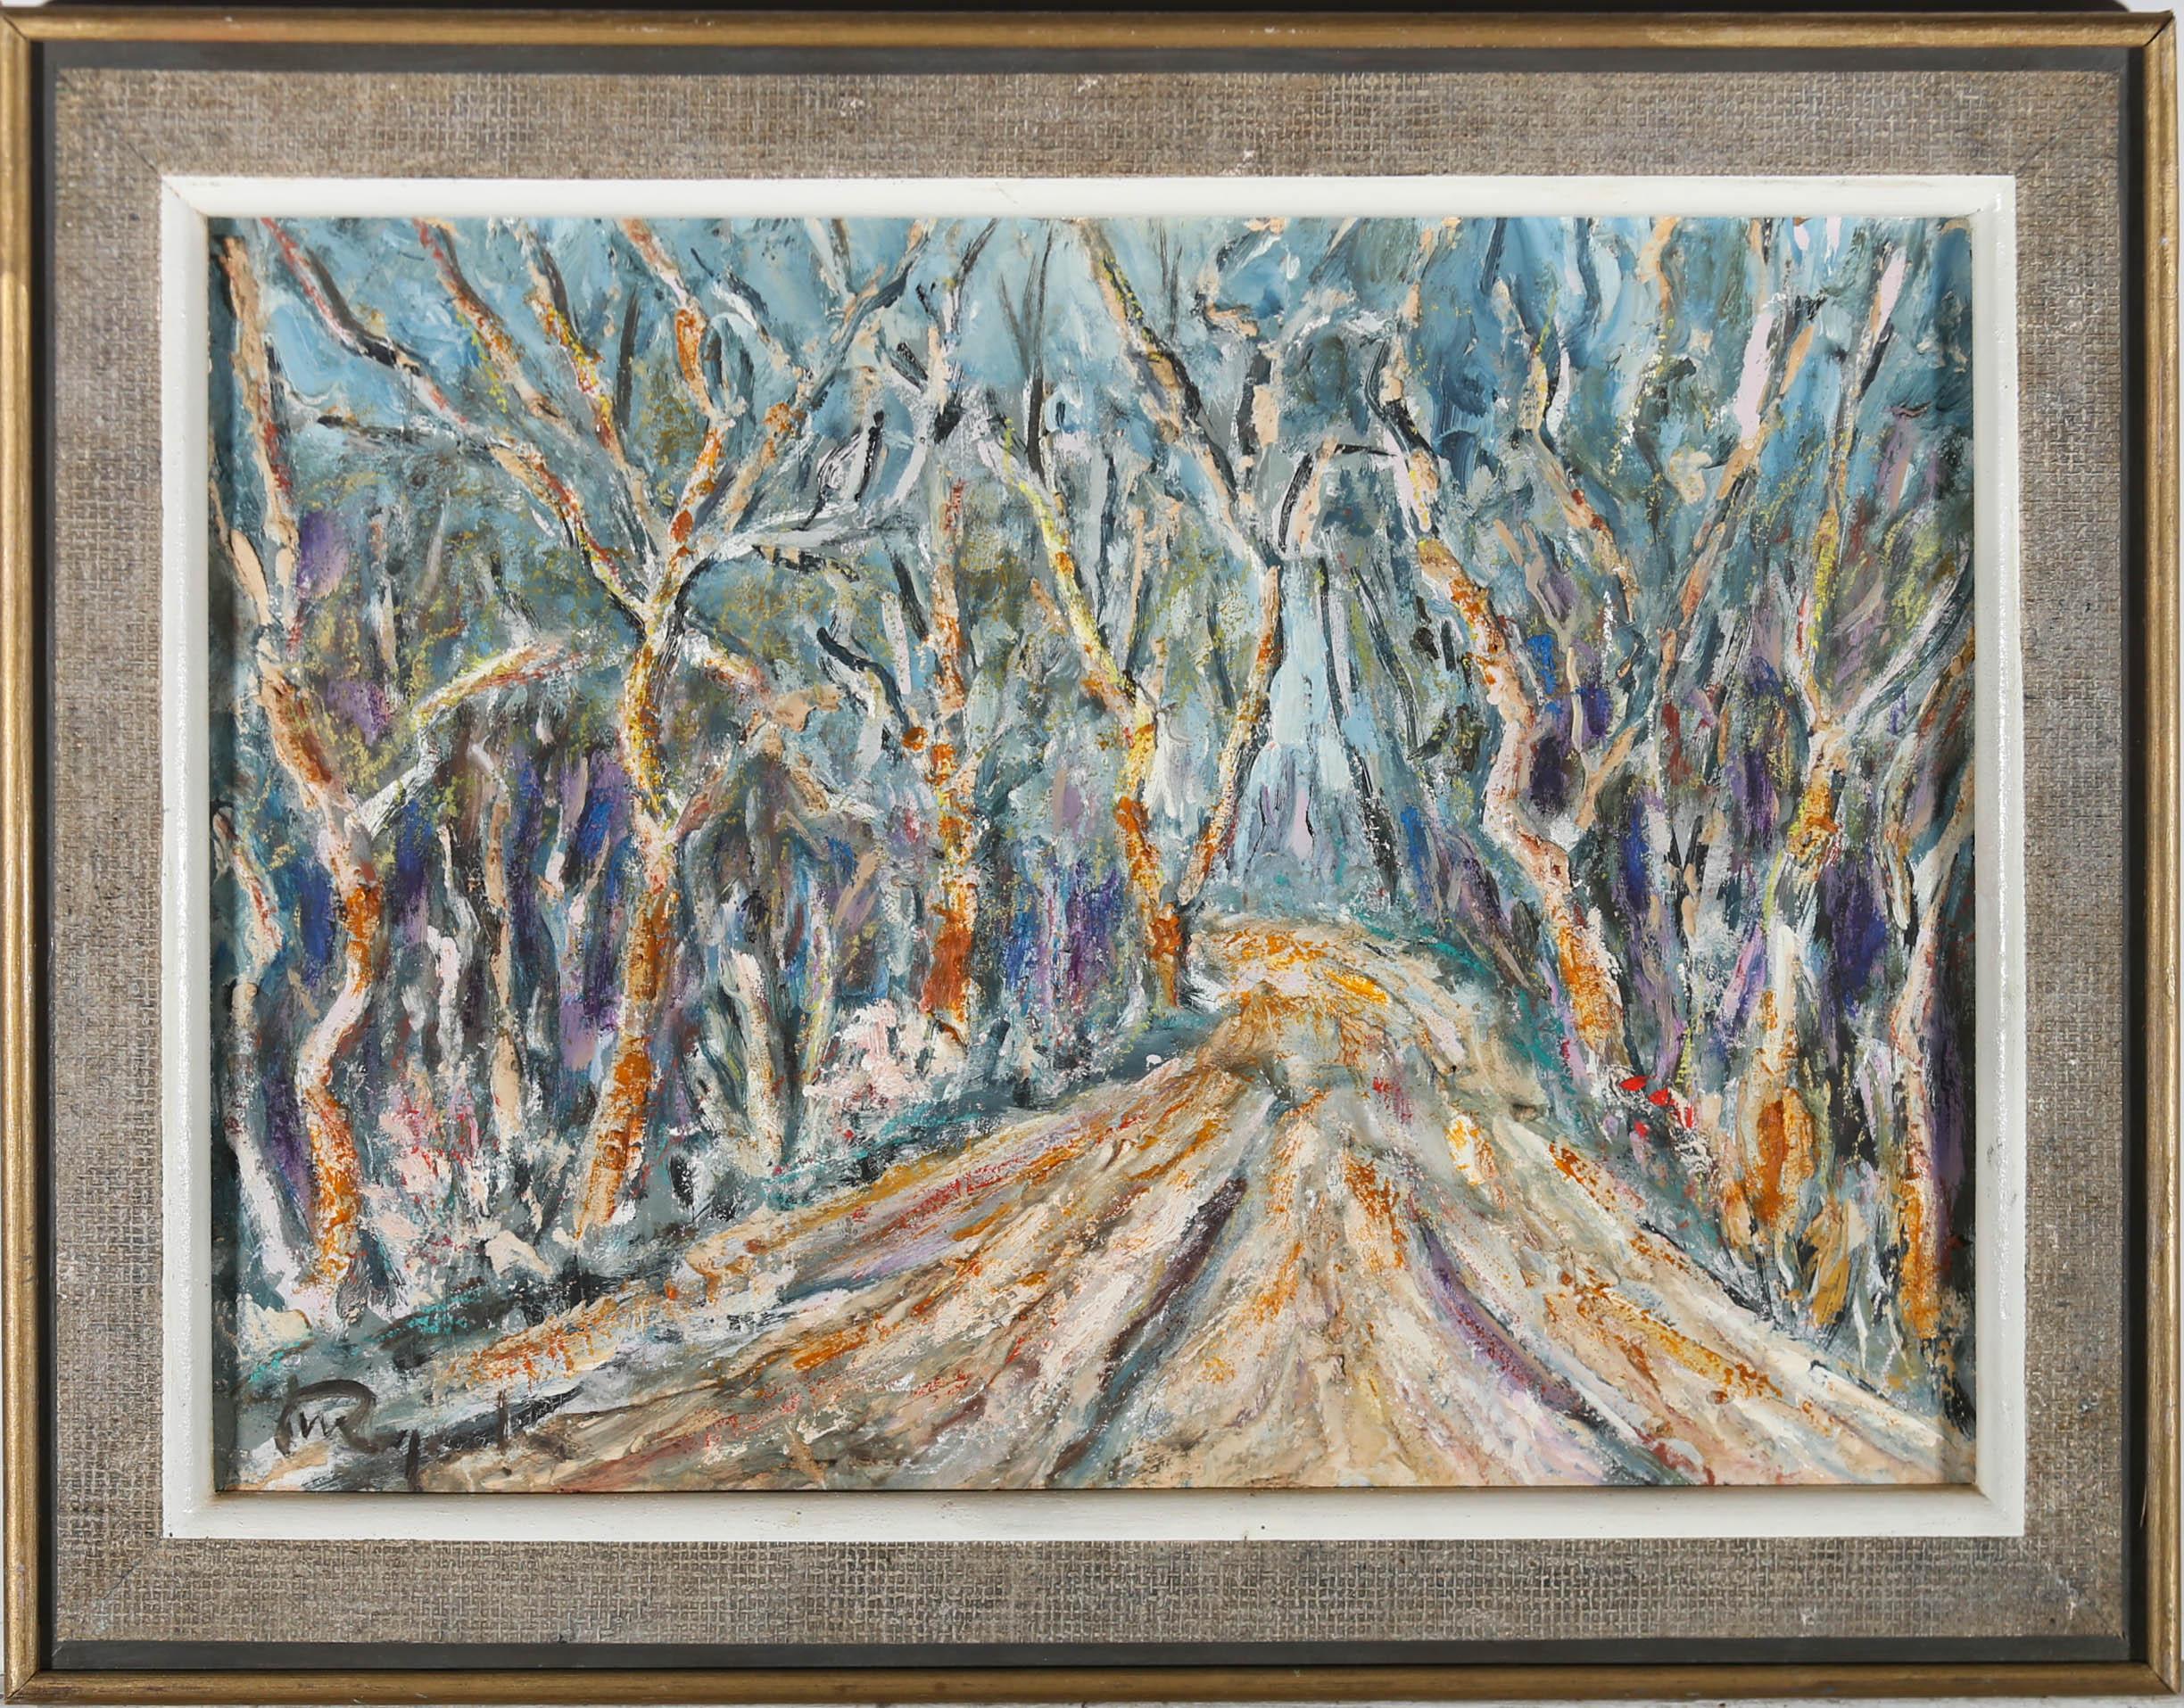 This expressive study captures a winding road lined with trees. The artist captures the bare branches of the winter trees in an expressive colour palette and using an impasto technique as they wind through the composition. Signed with a monogram to